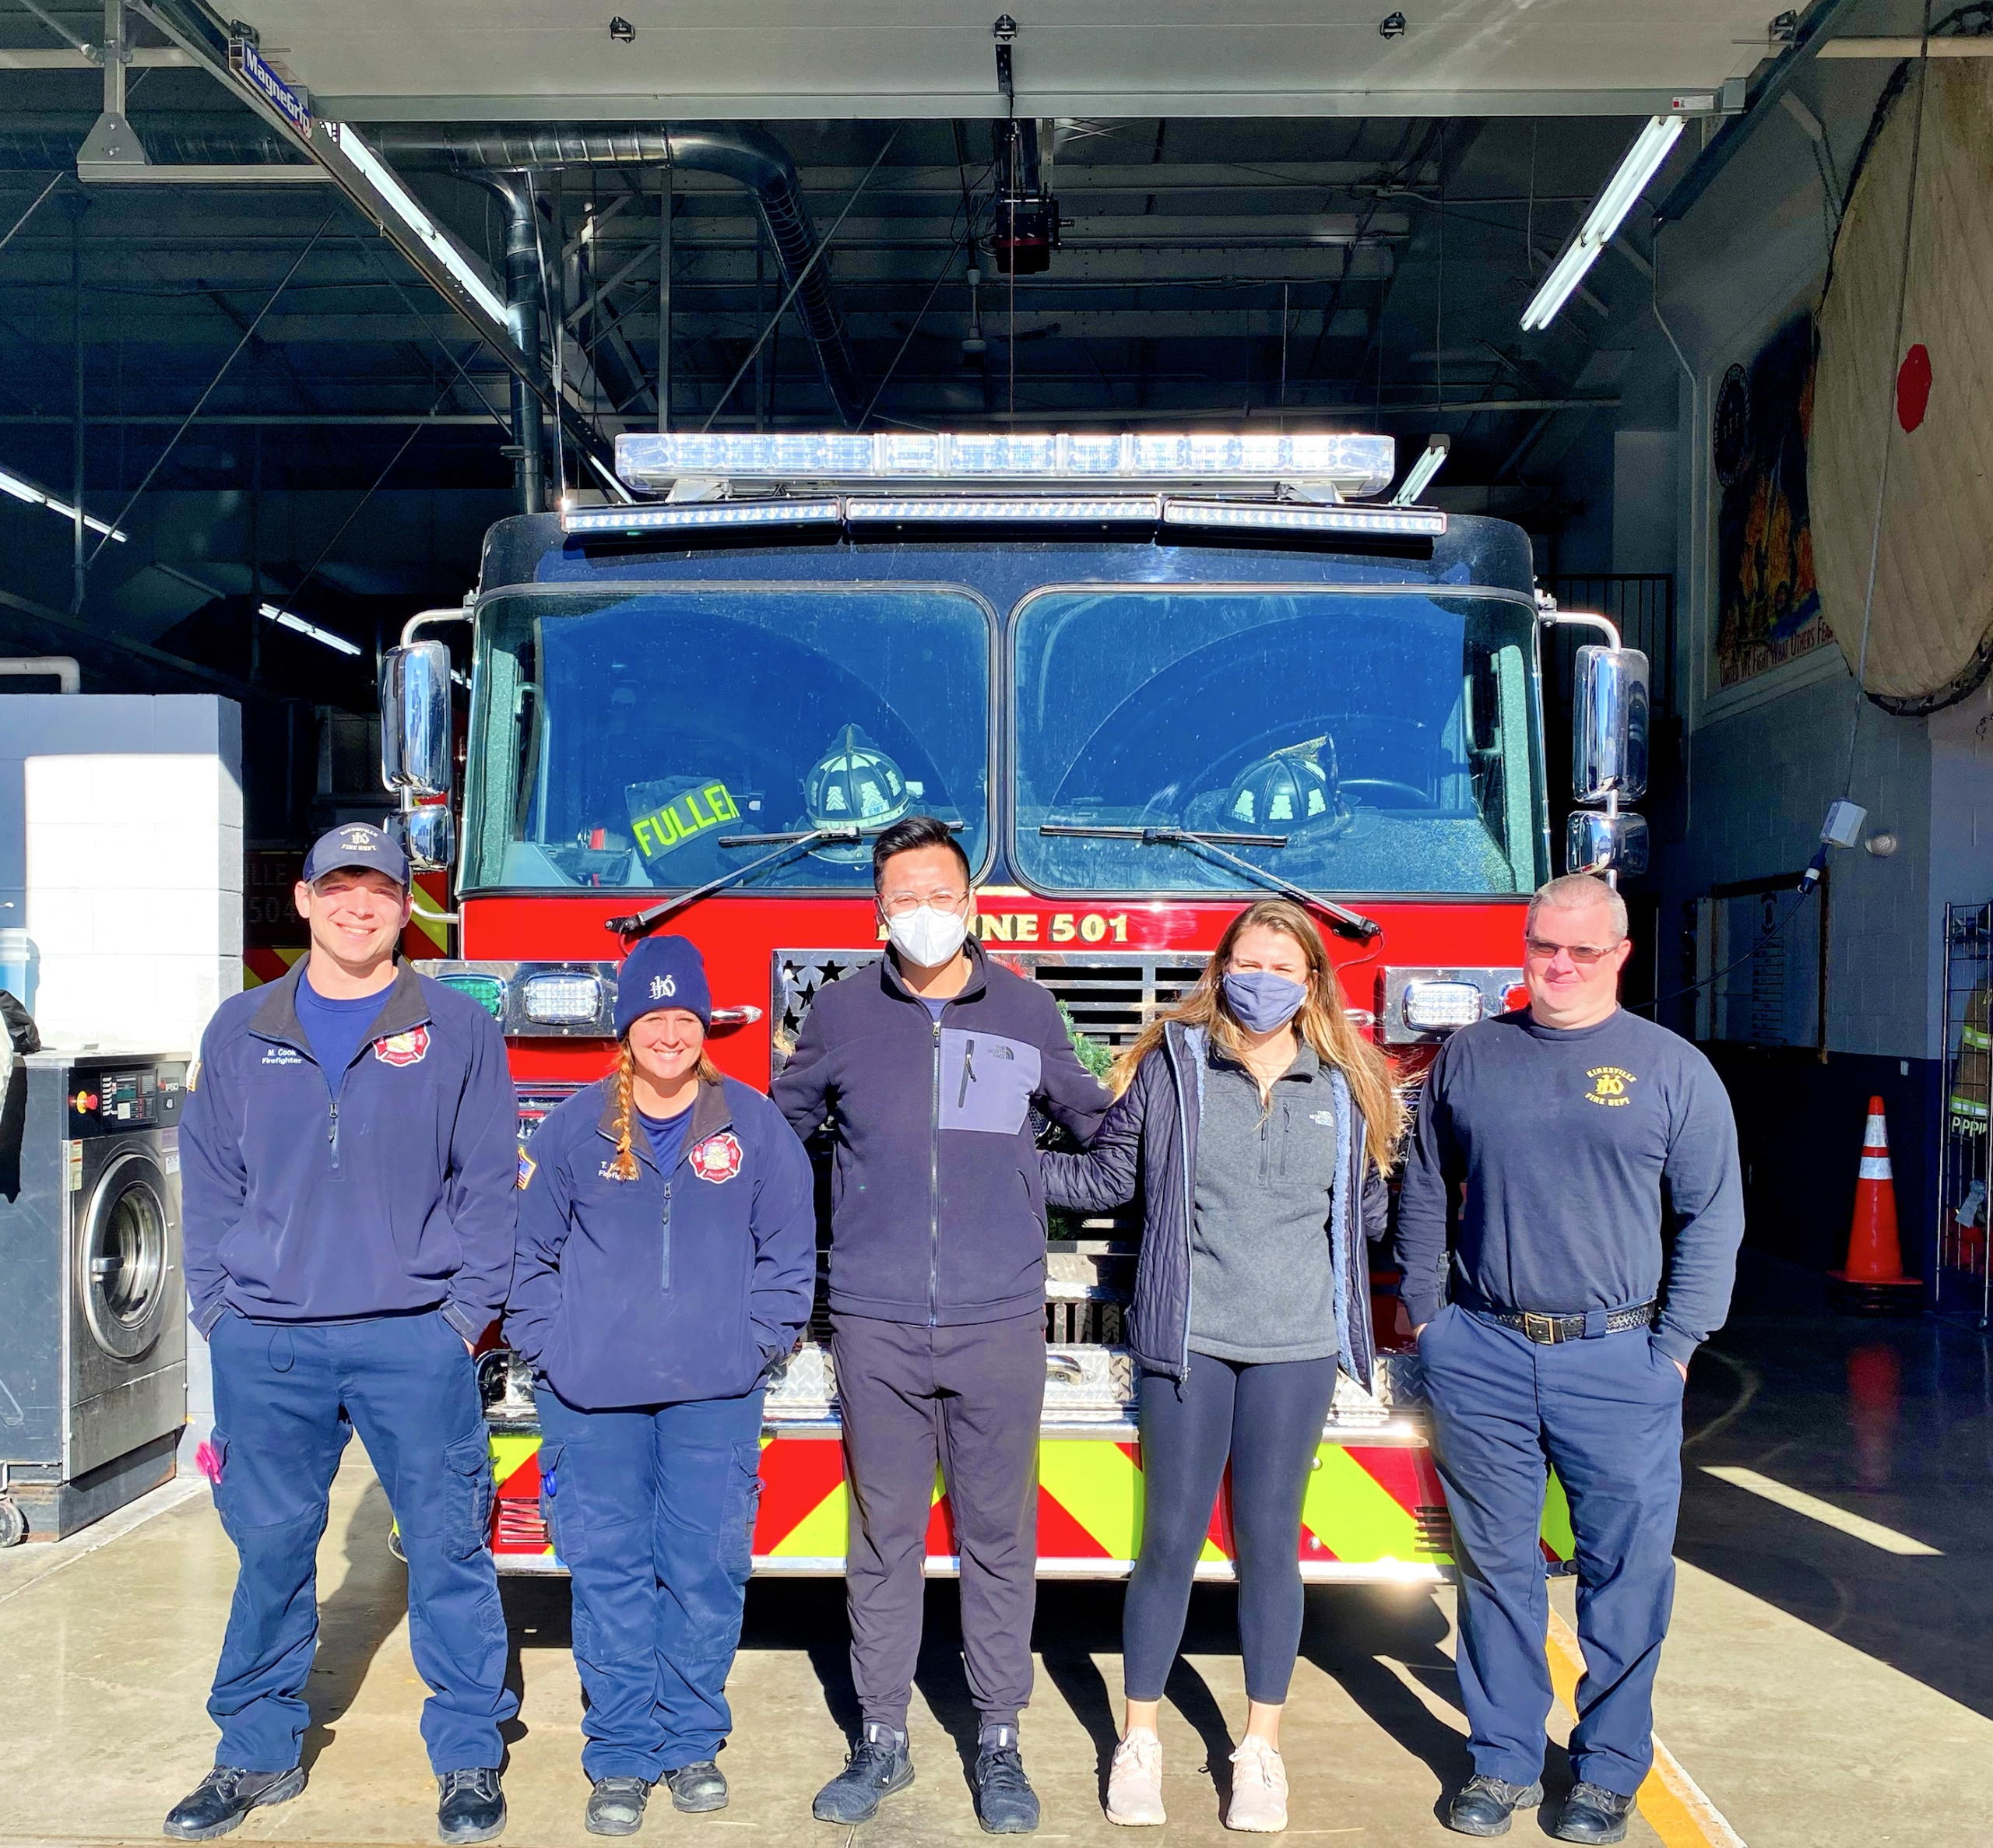 Shelby Terrel, OMS II, president of Pediatrics Club, and James LÍu, OMS II, co-president of Alpha Phi Omega, pose with members of the Kirksville Fire Department